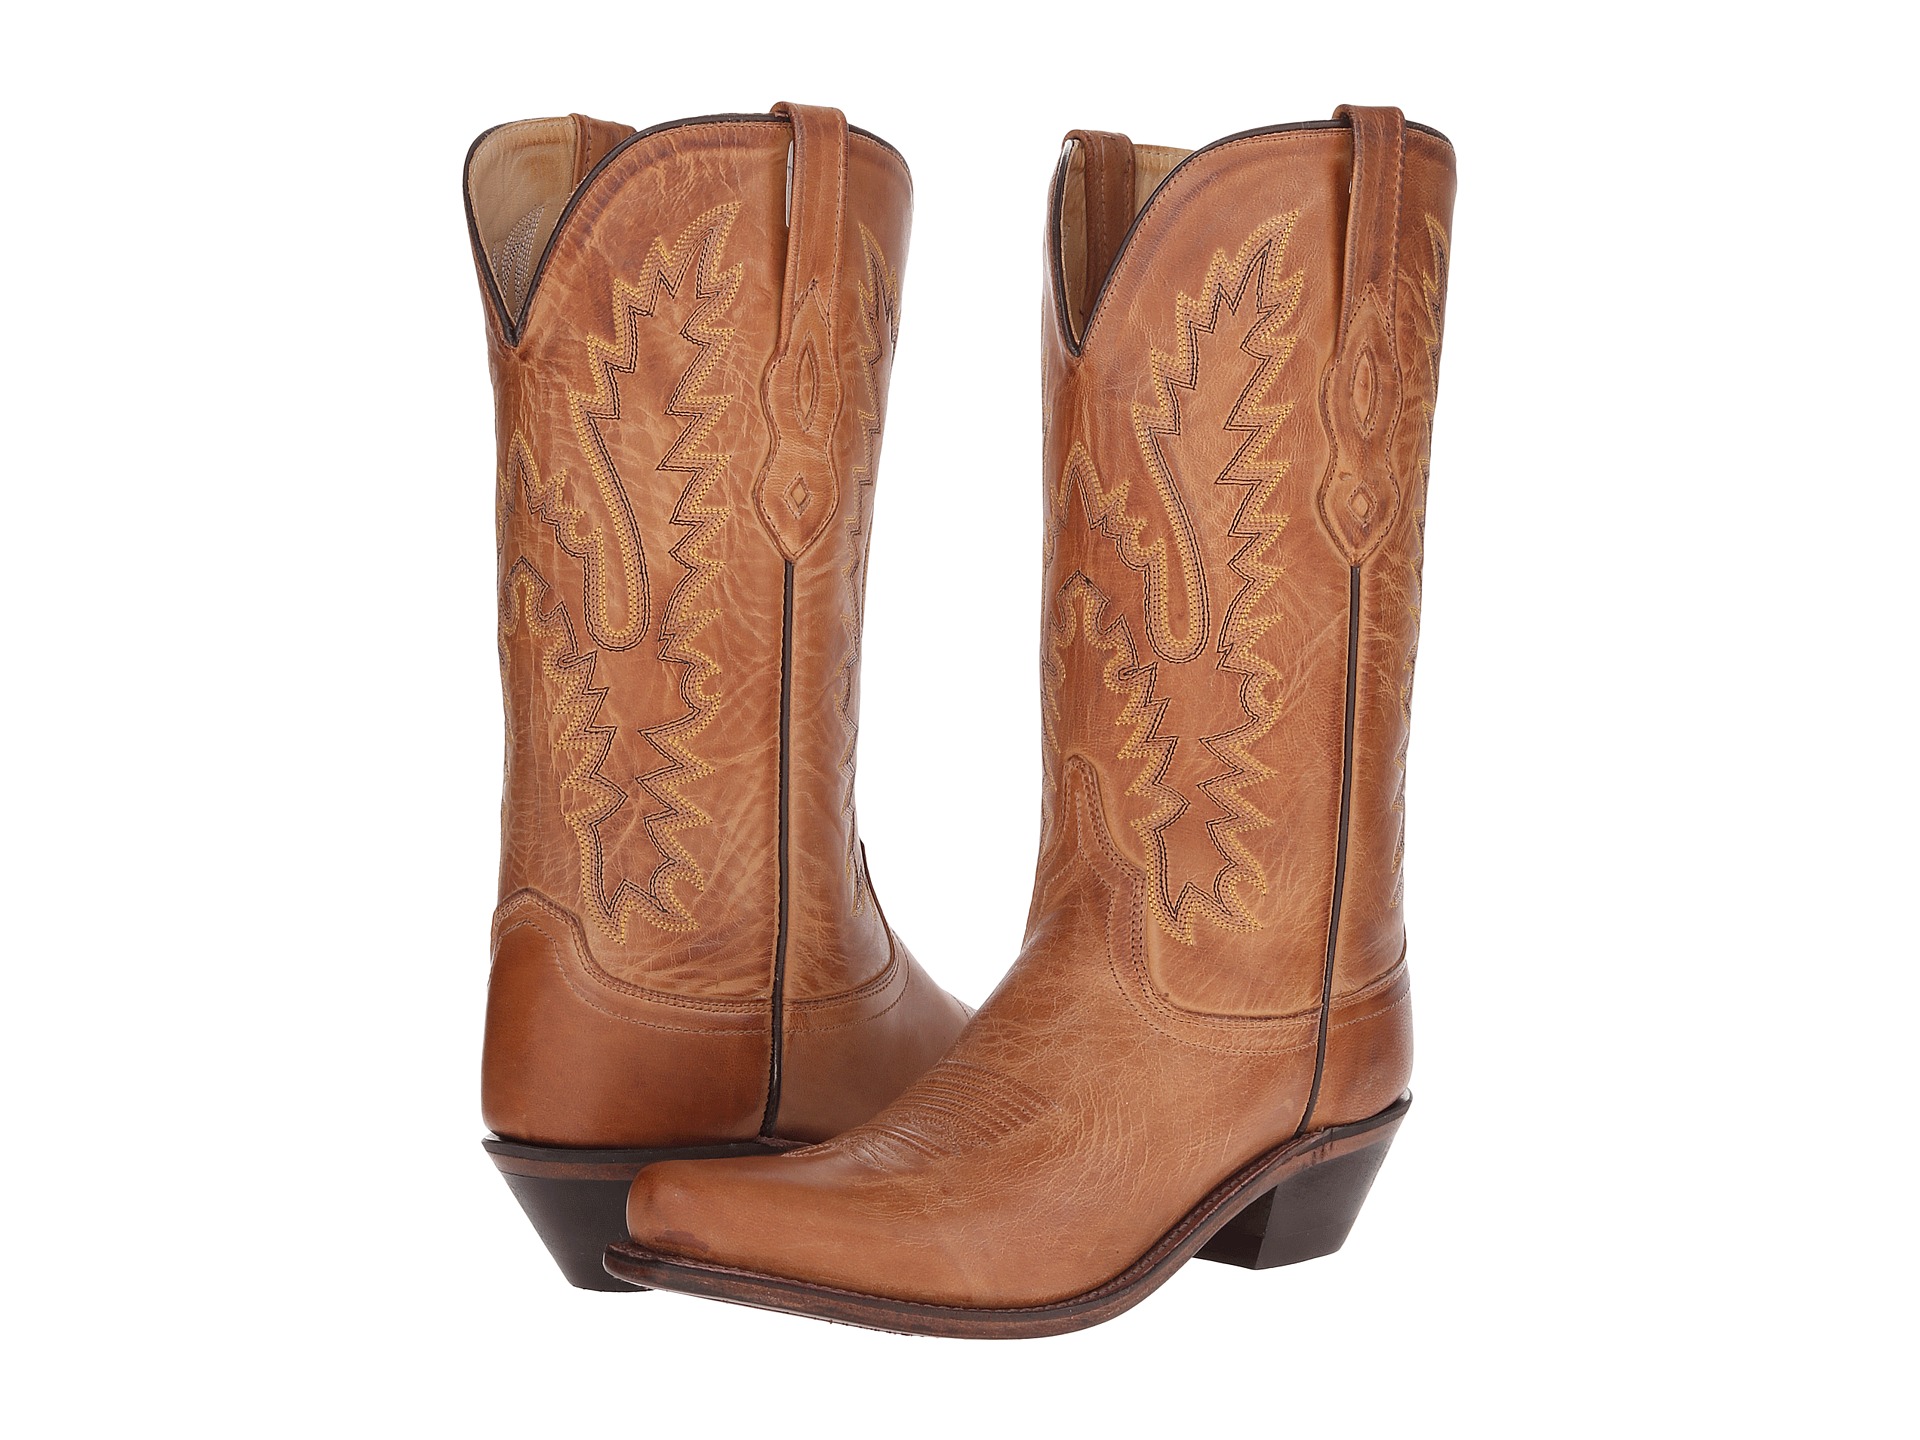 old west boots lf1529 at zappos.com erxjydk